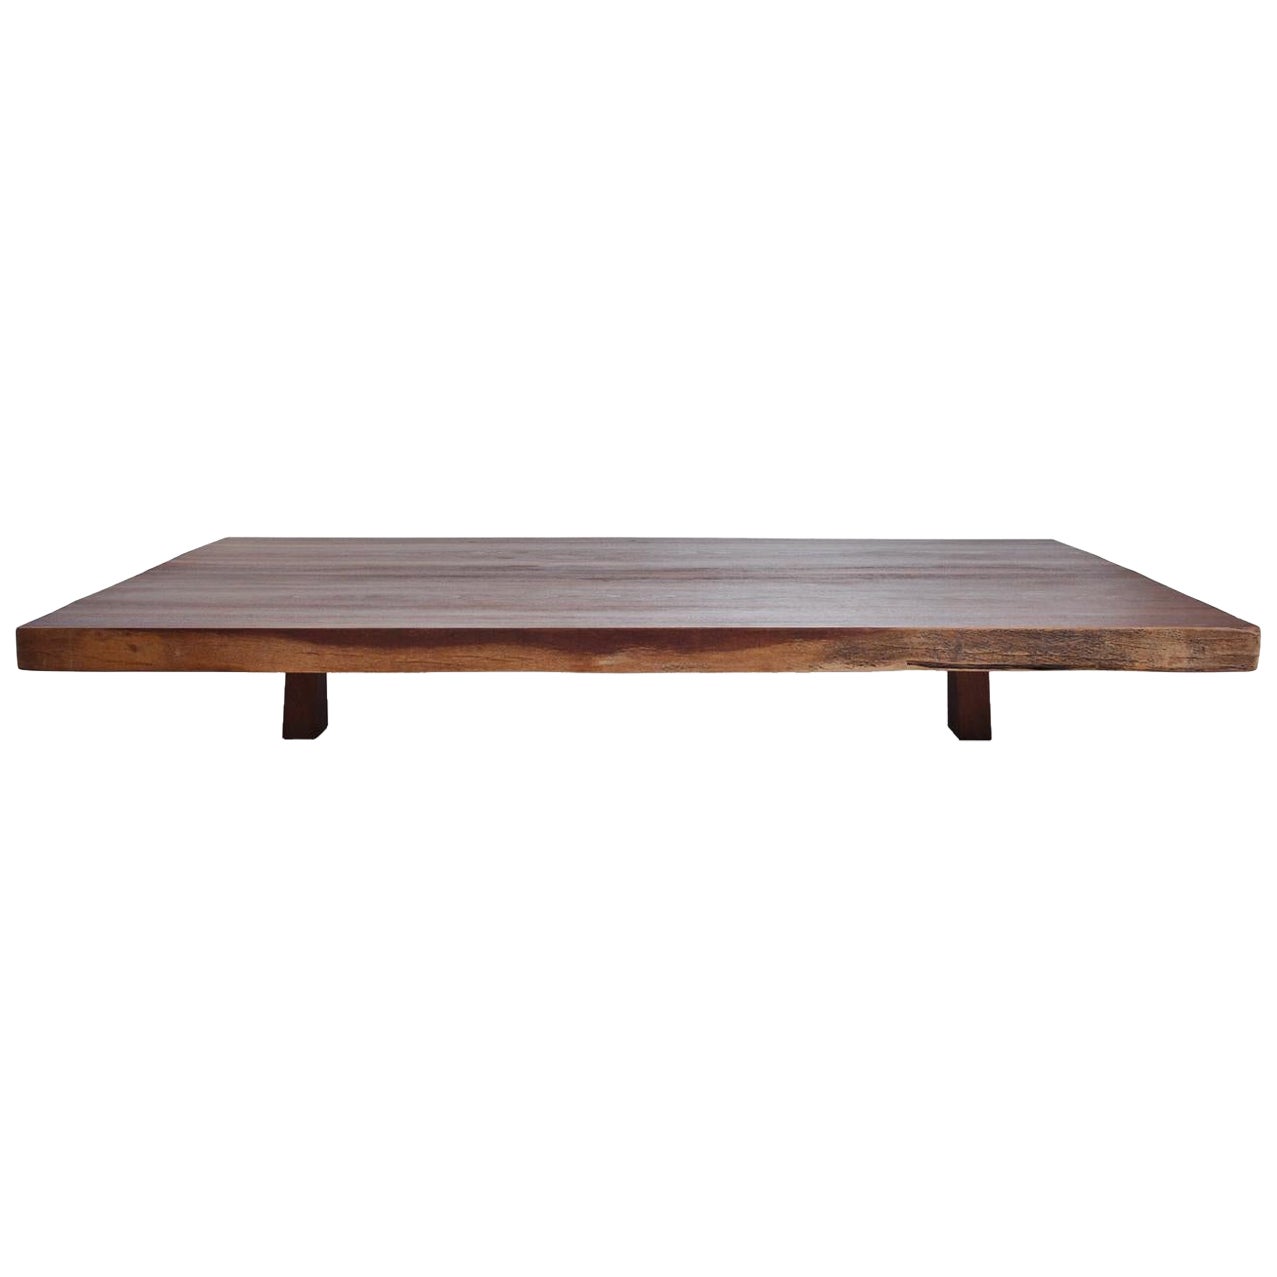 Bespoke Coffee Table, Antique Hardwood Slab and Wood Bases, by P. Tendercool For Sale